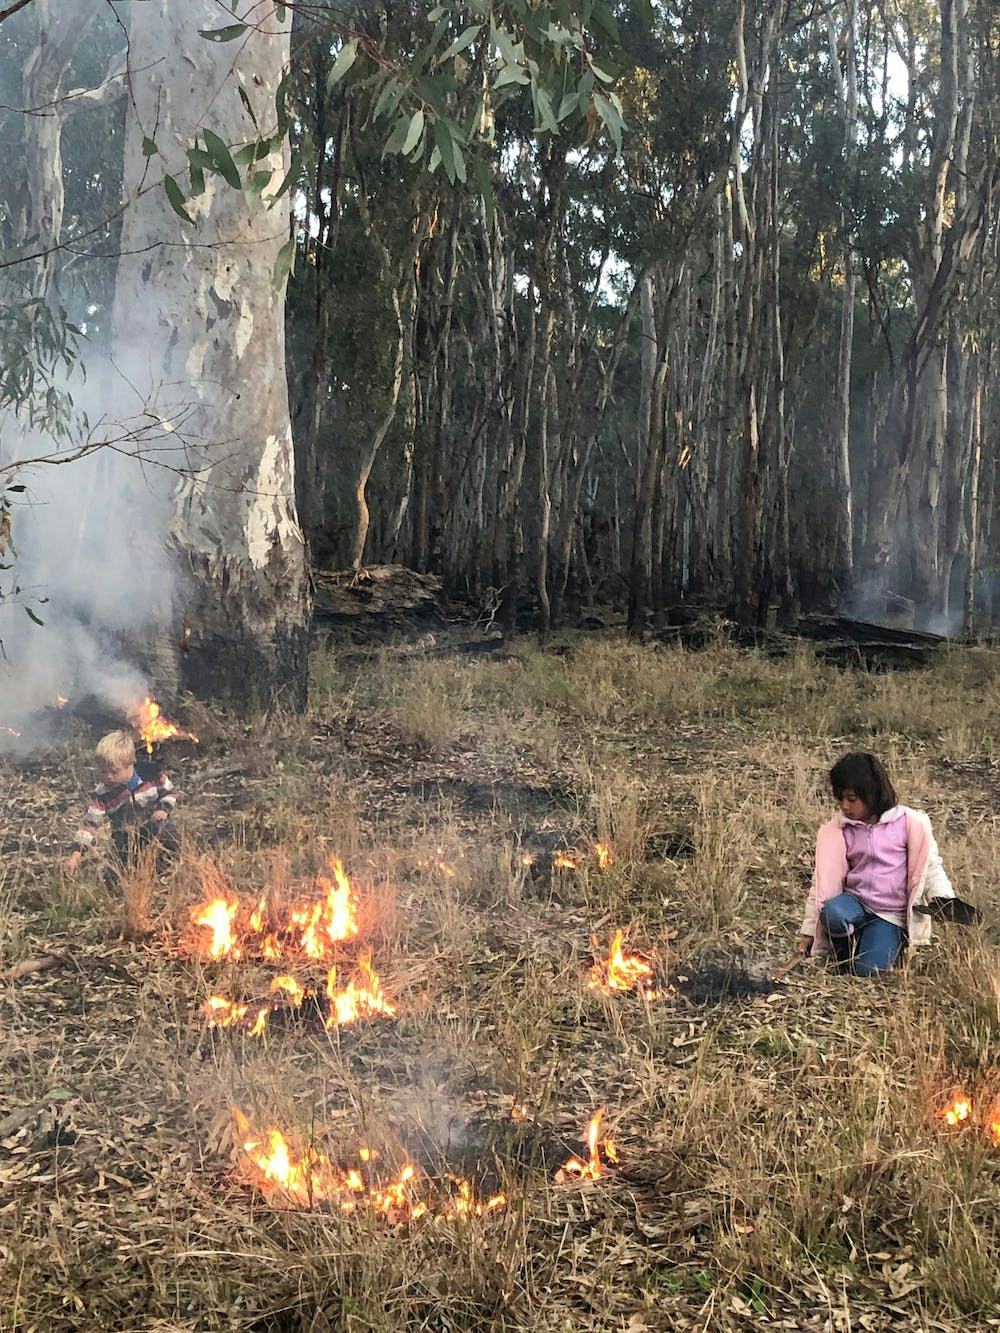 The author’s children at the National Indigenous Fire Workshop Dhungala 2019. Lauren Tynan, Author provided